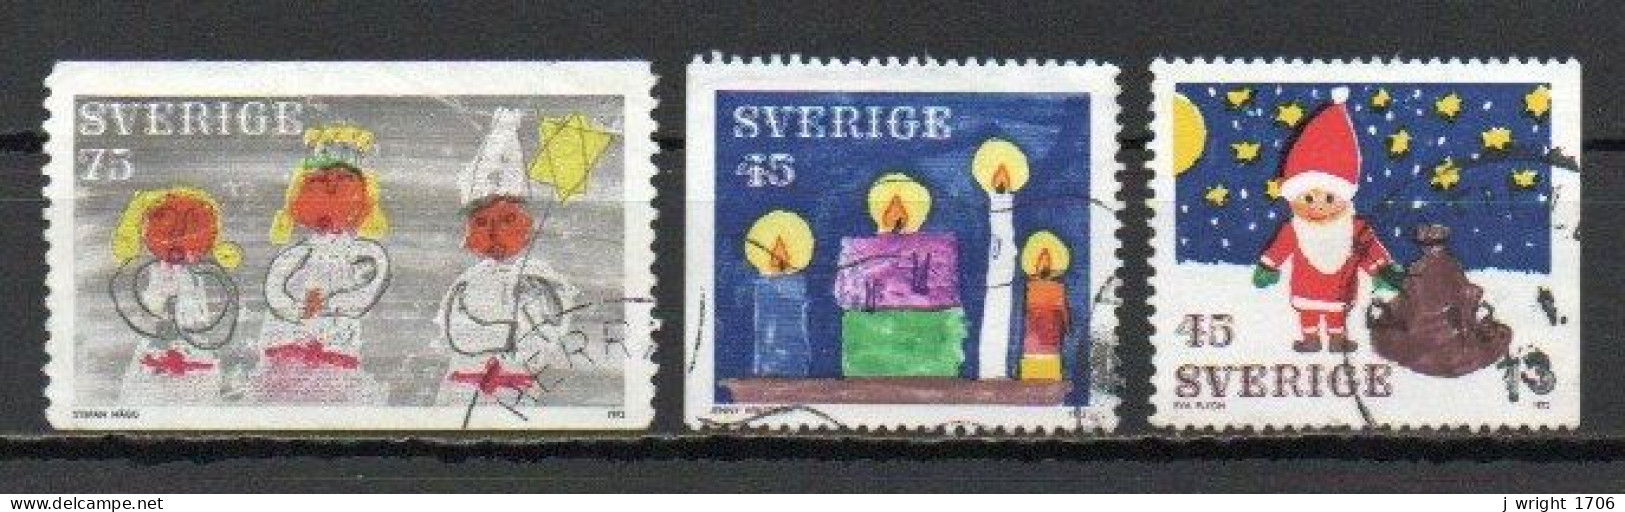 Sweden, 1972, Christmas, Set, USED - Used Stamps